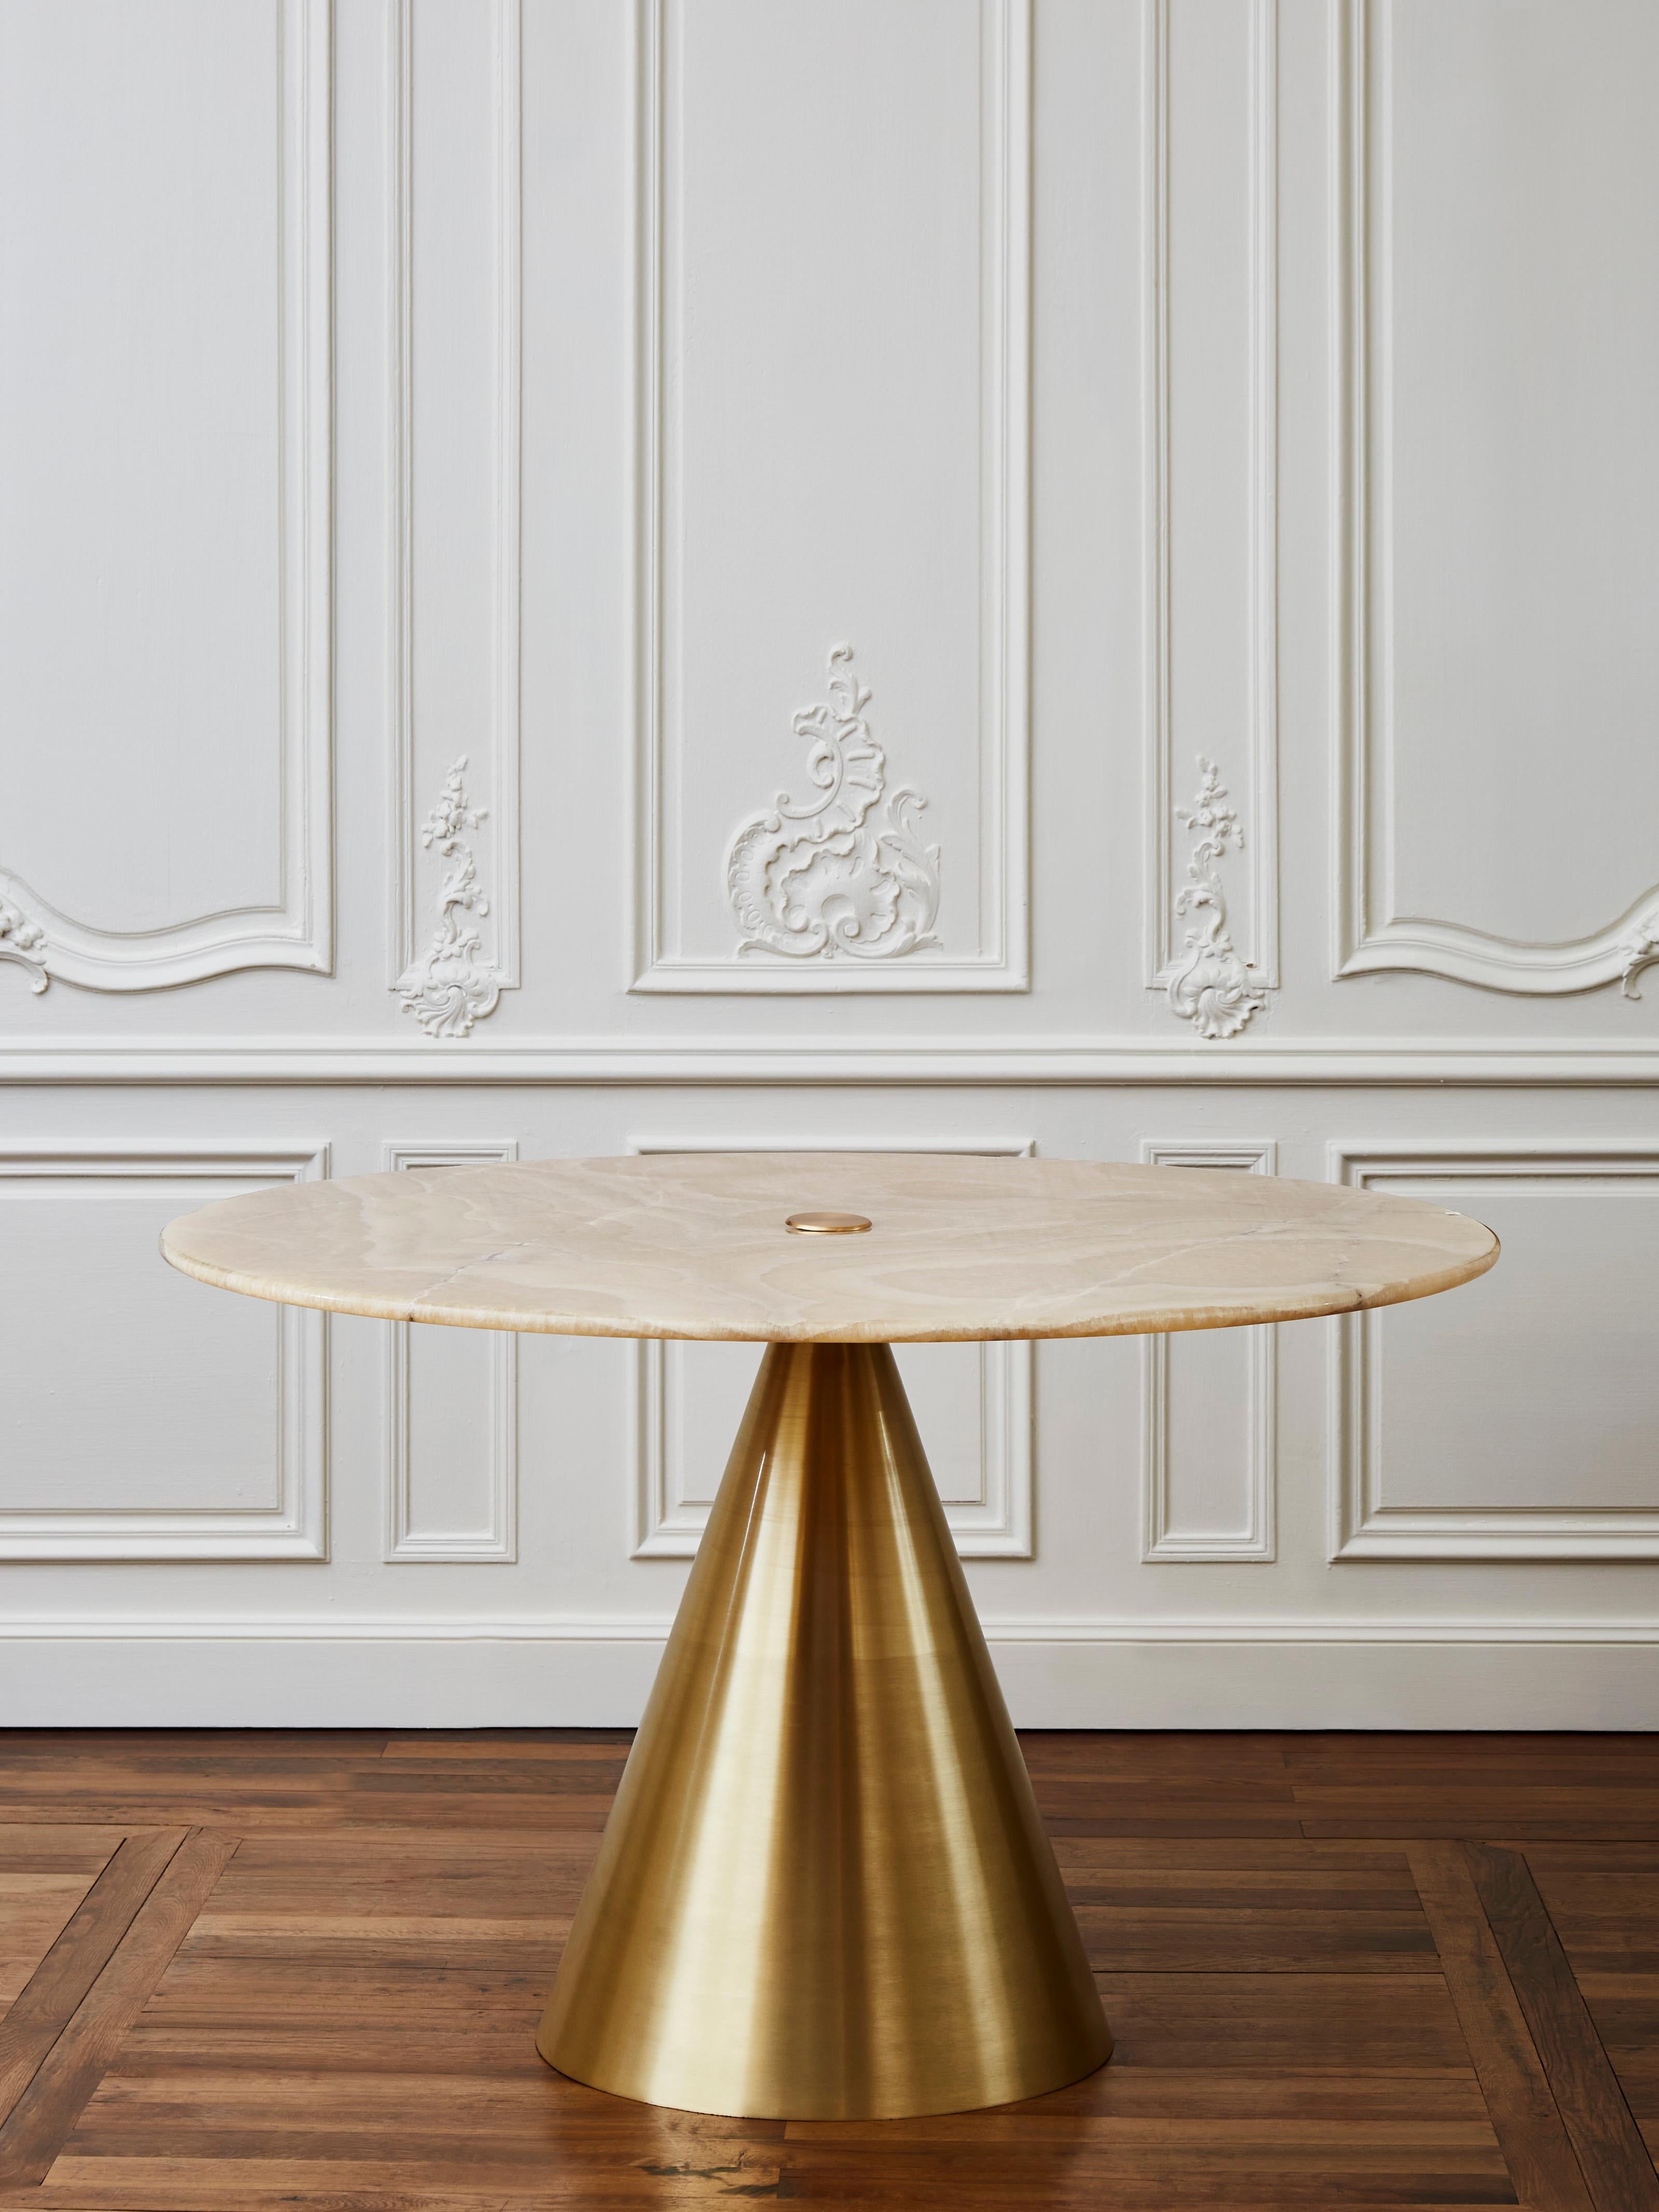 Superb center table in onyx and brass base by Studio Glustin.
France, 2021.